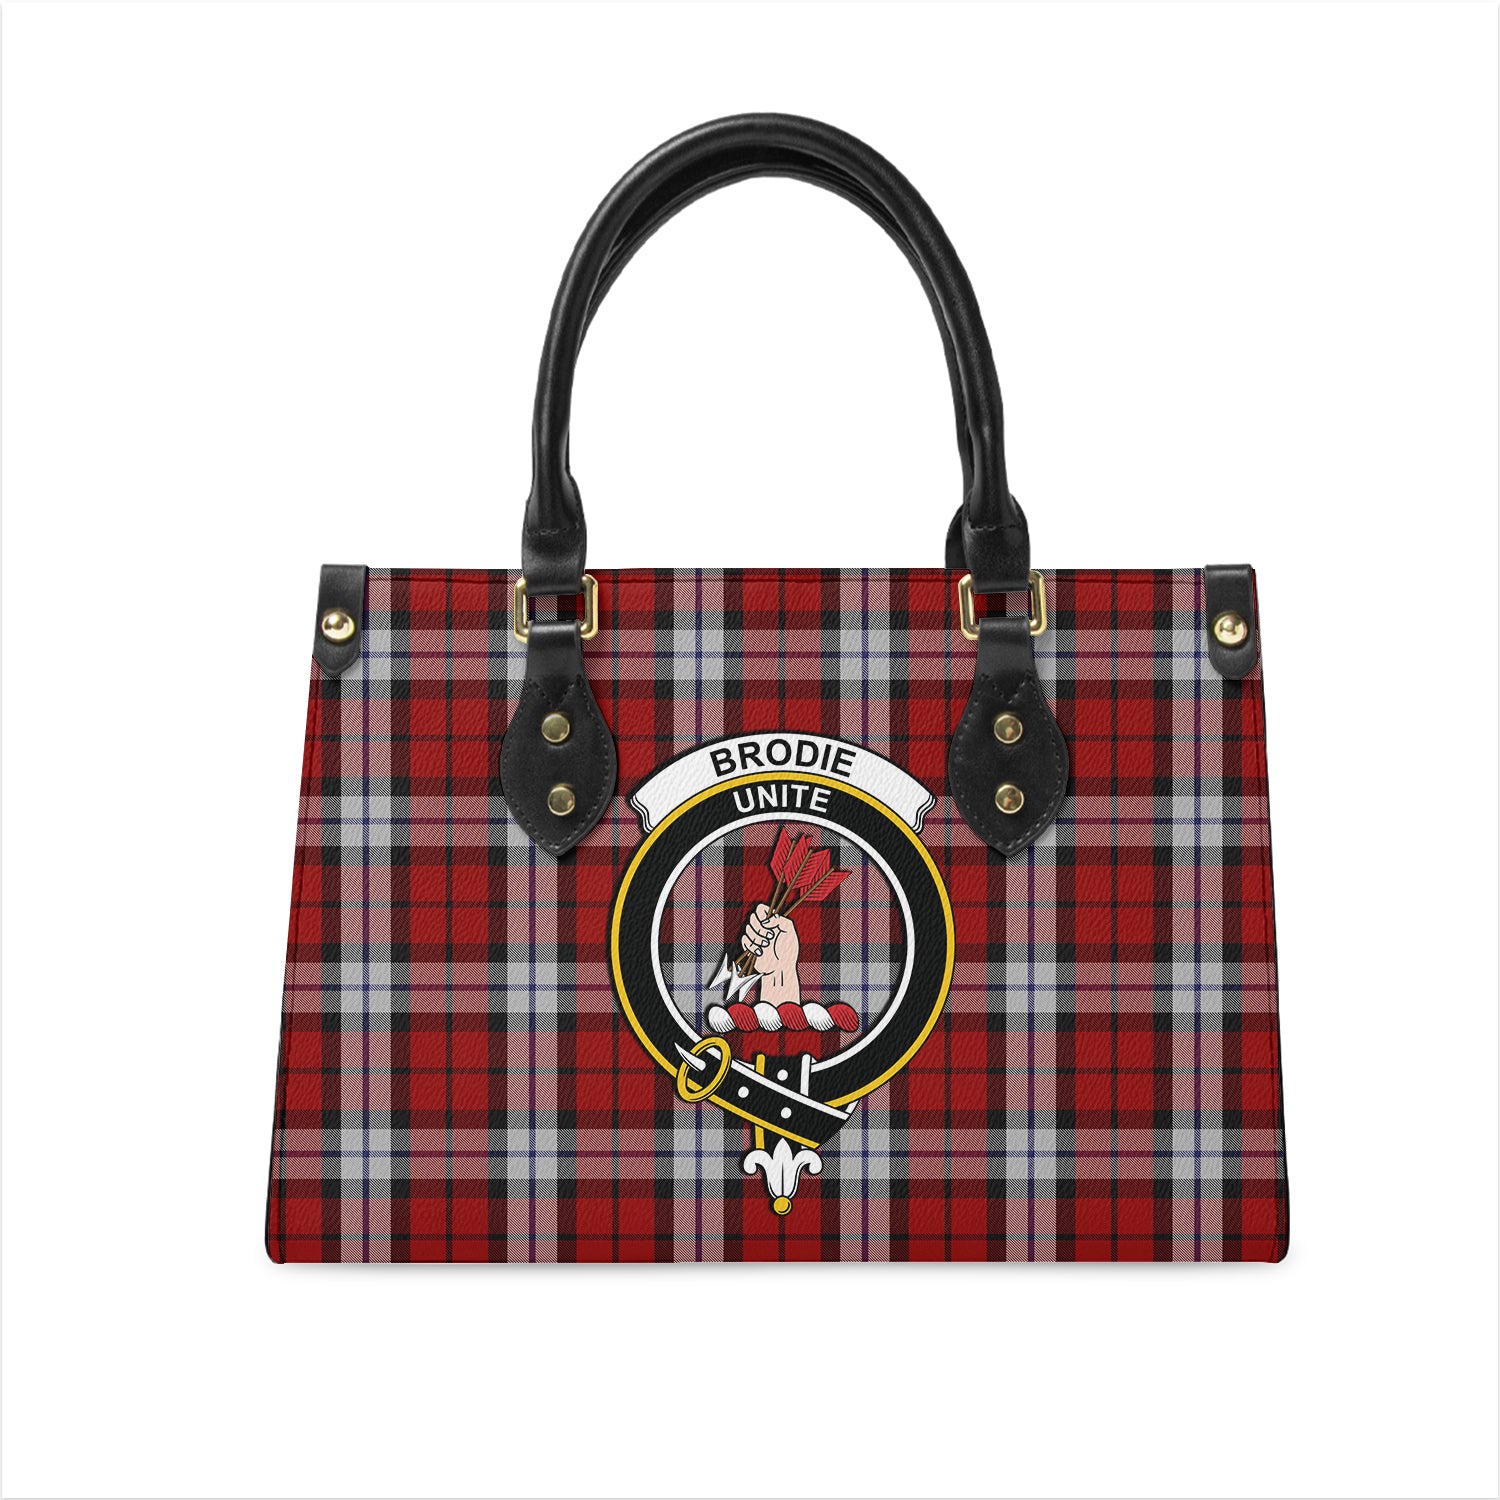 Brodie Dress Tartan Leather Bag with Family Crest One Size 29*11*20 cm - Tartanvibesclothing